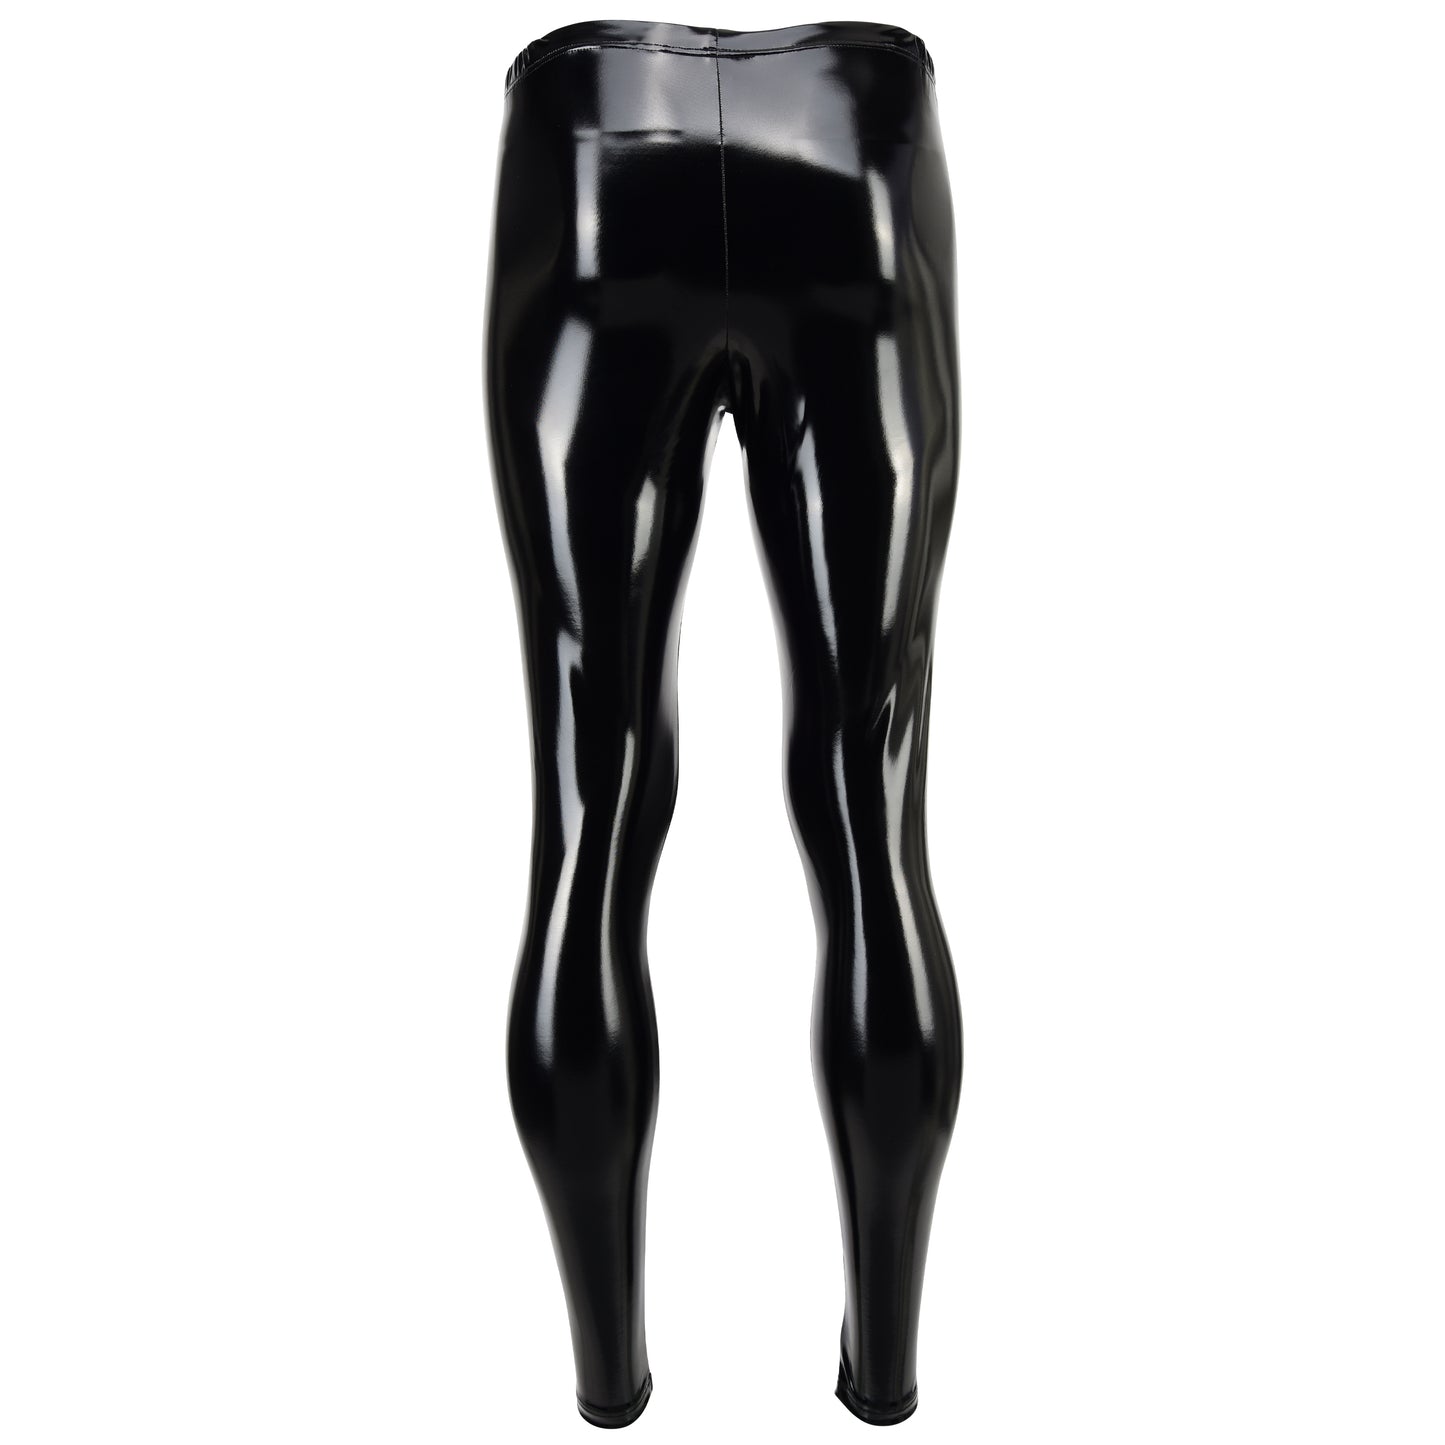 MEN'S ZIPPED LEGGINGS BLACK HIGH GLOSS LACQUER LATEX LOOK WITH ZIPPER SILVER MEGGINGS